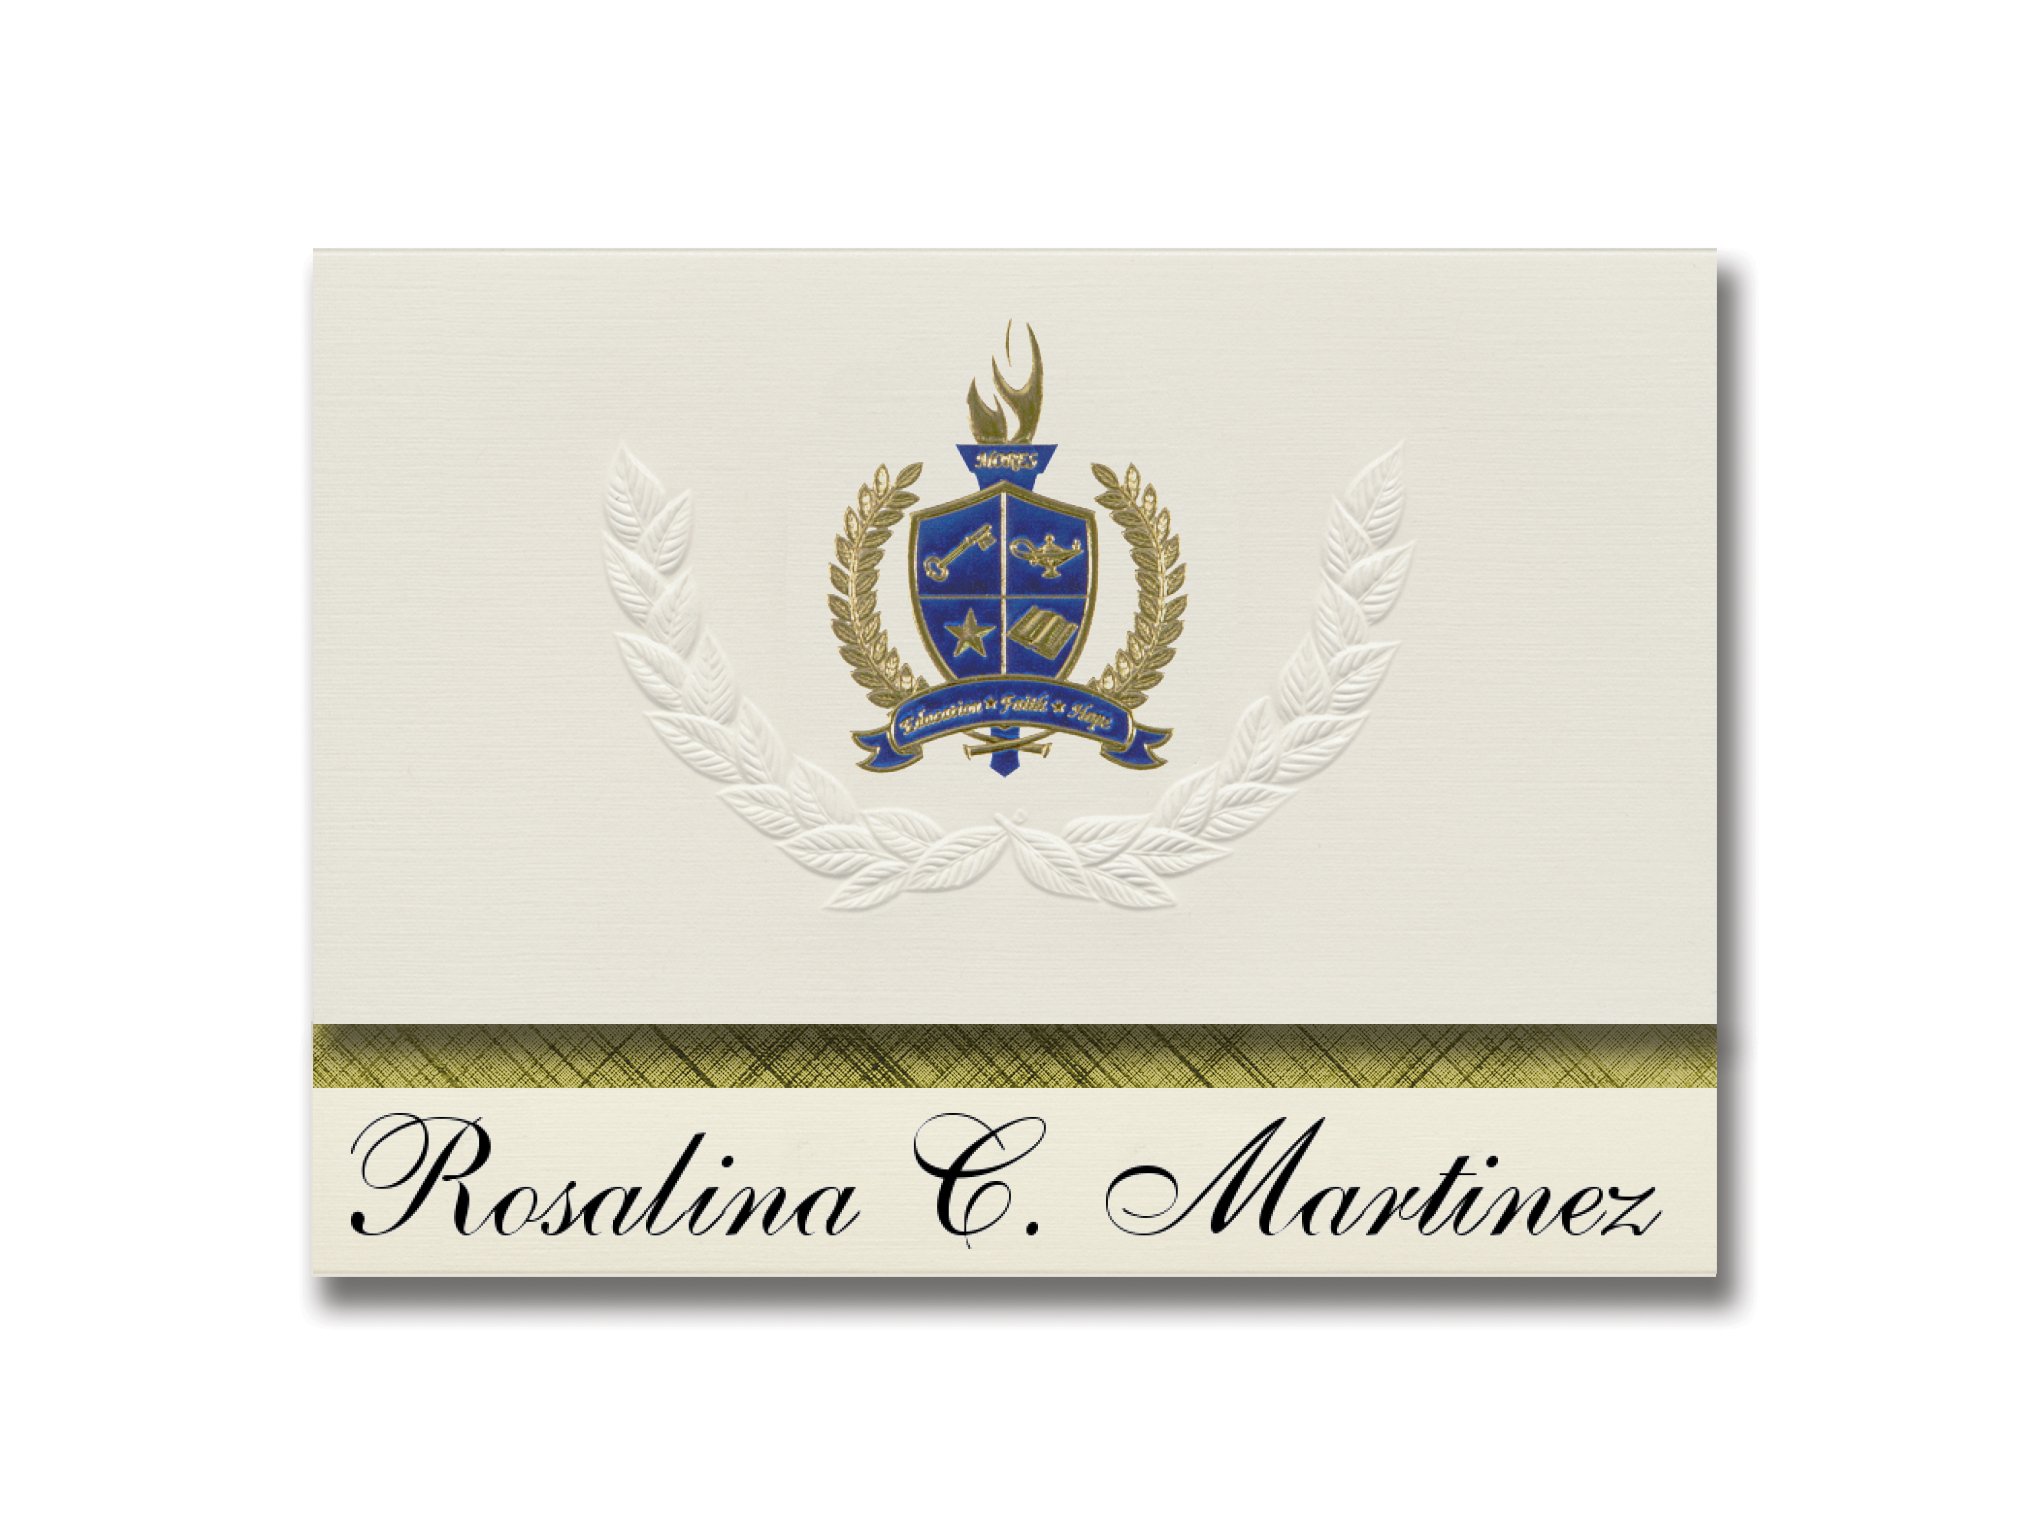 Signature Announcements Rosalina C. Martinez (Catano, PR) Graduation Announcements, Presidential style, Elite package of 25 with Gold & Blue Metall...